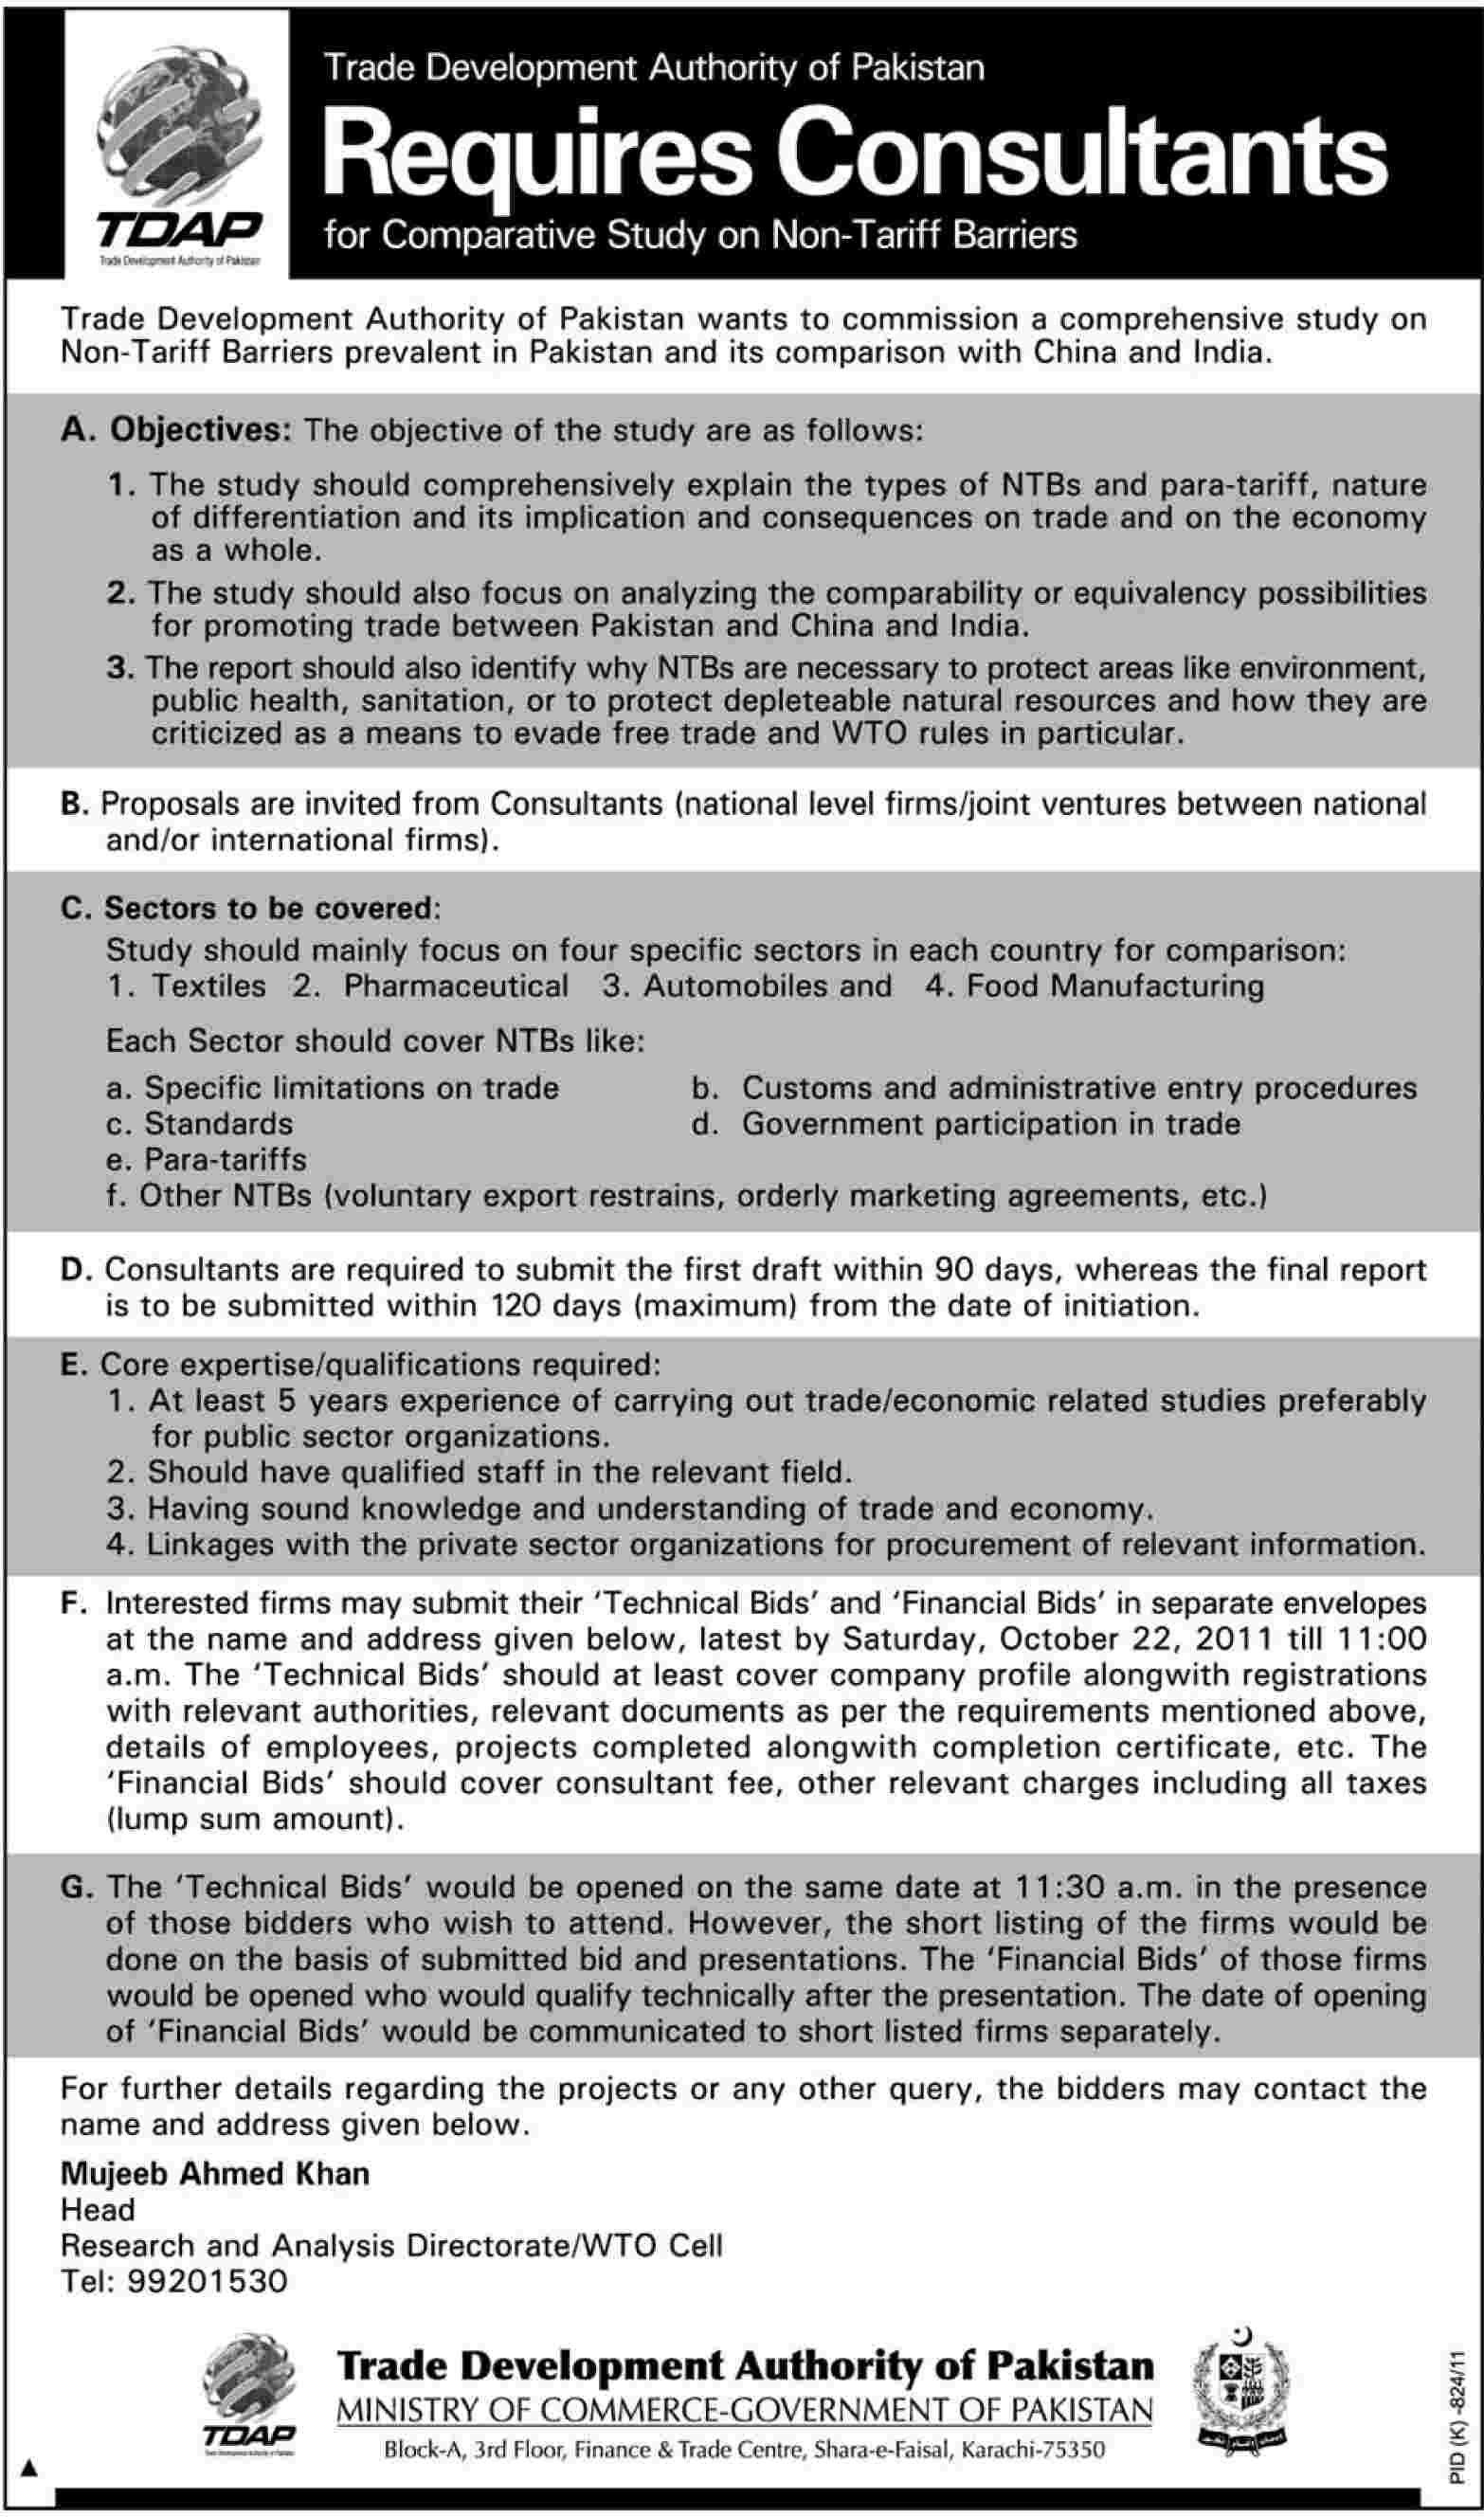 Trade Development Authority of Pakistan Required Services of Consultants